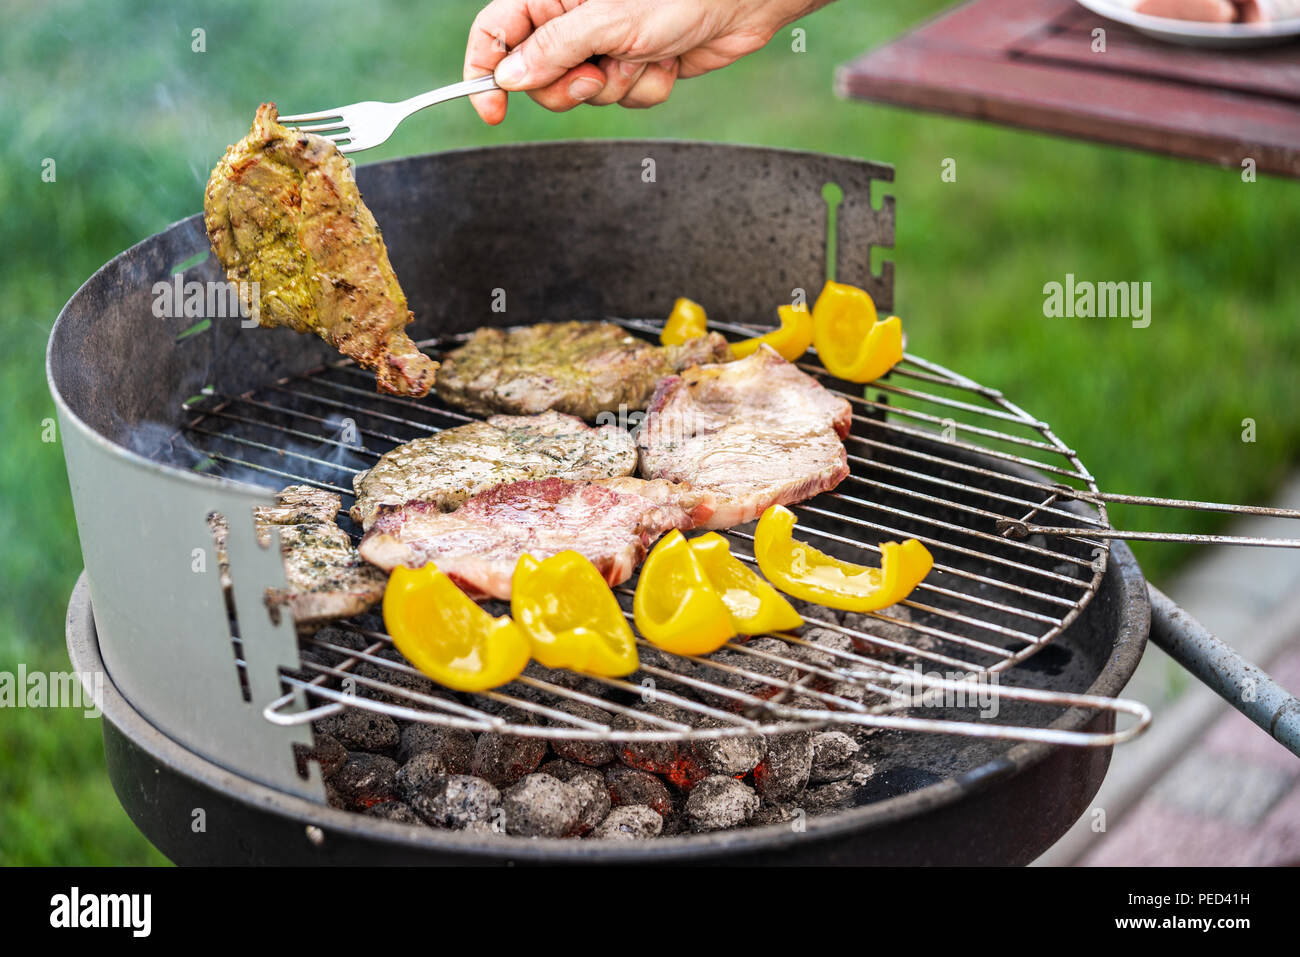 Meat and vegetables on a charcoal grill. Stock Photo